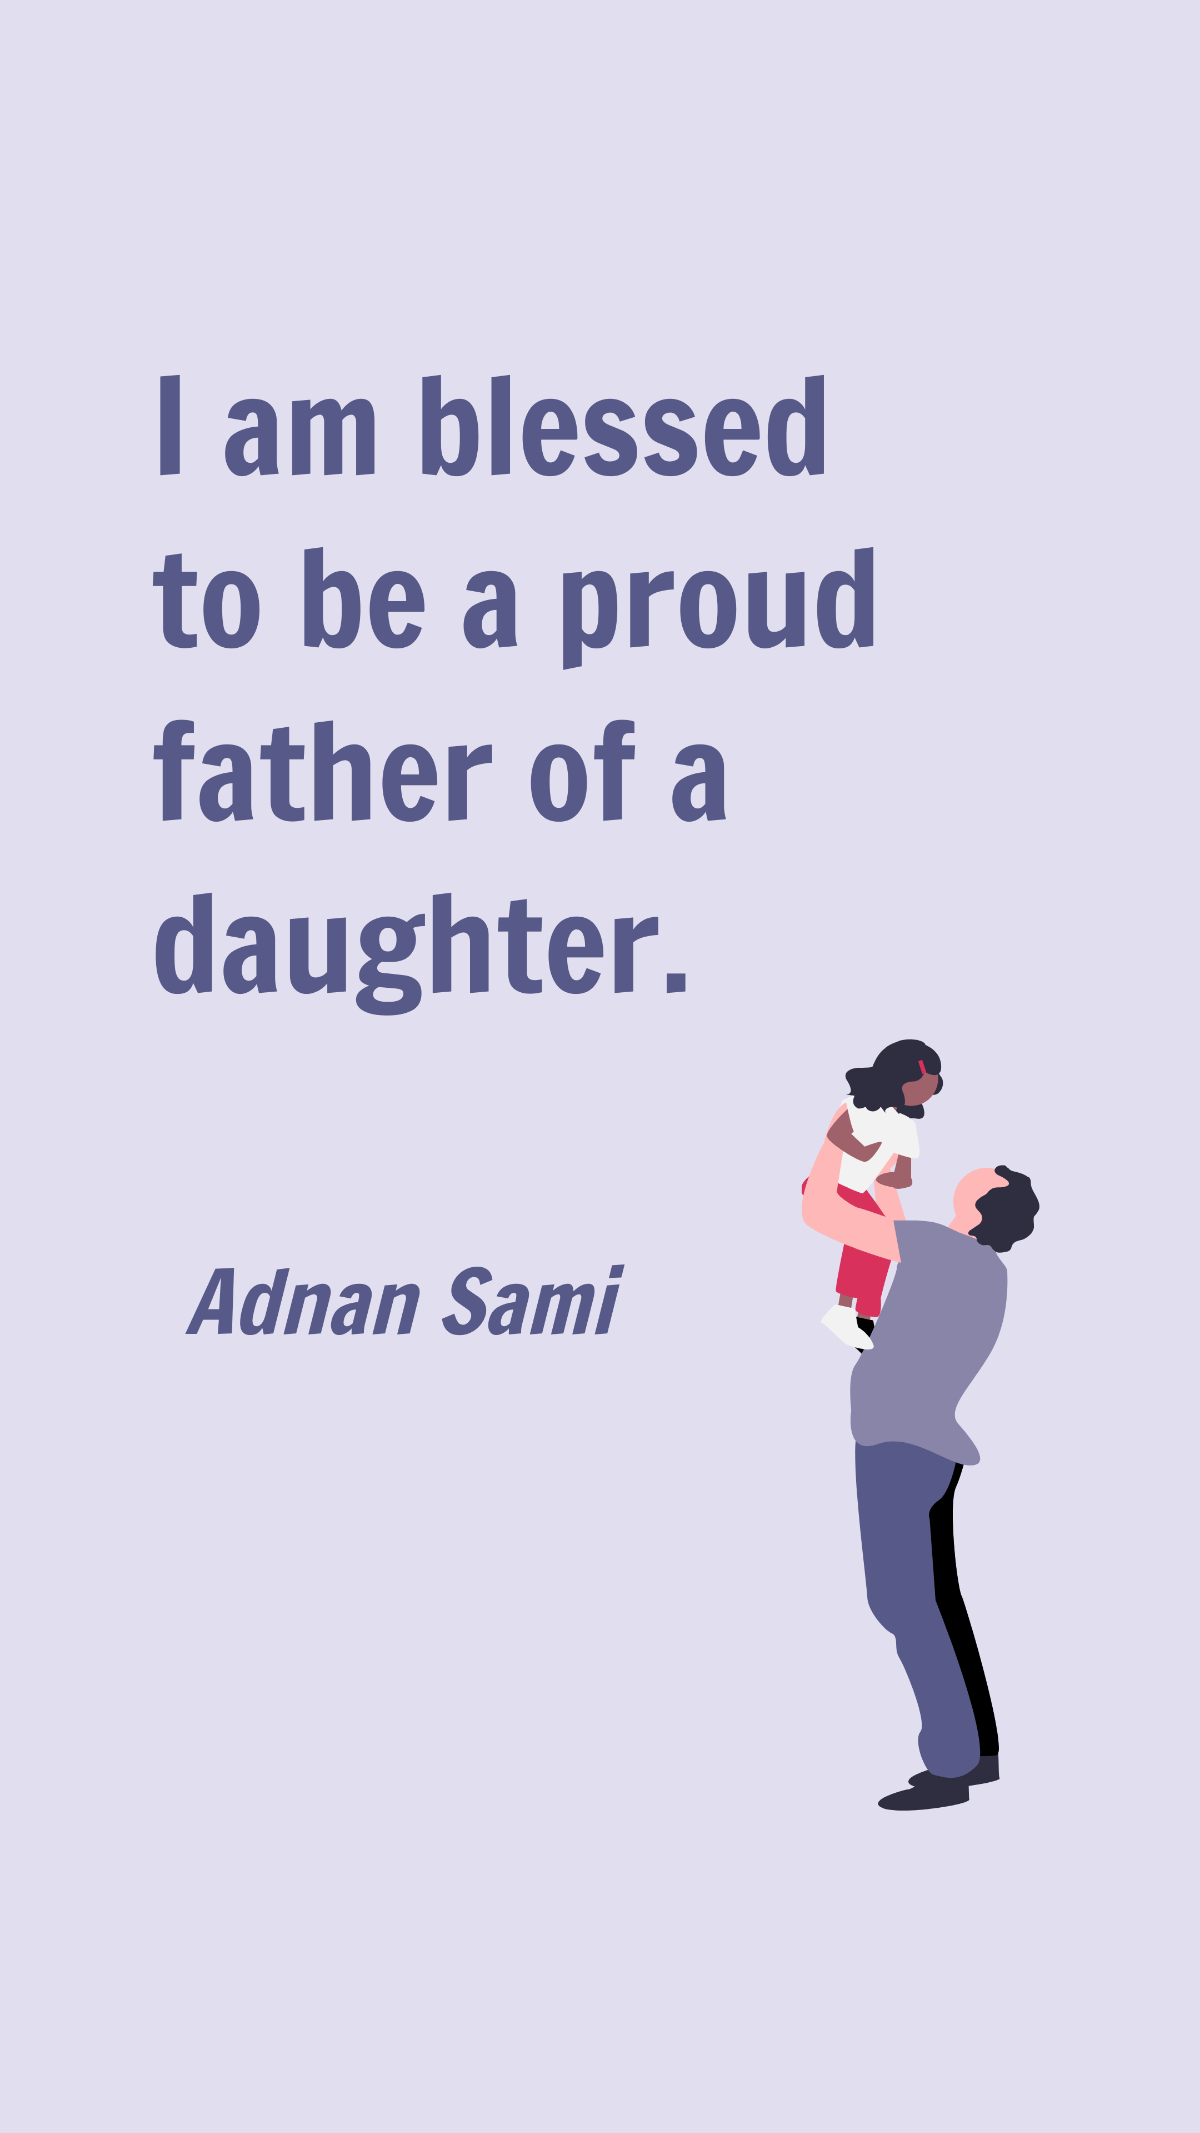 Adnan Sami - I am blessed to be a proud father of a daughter.